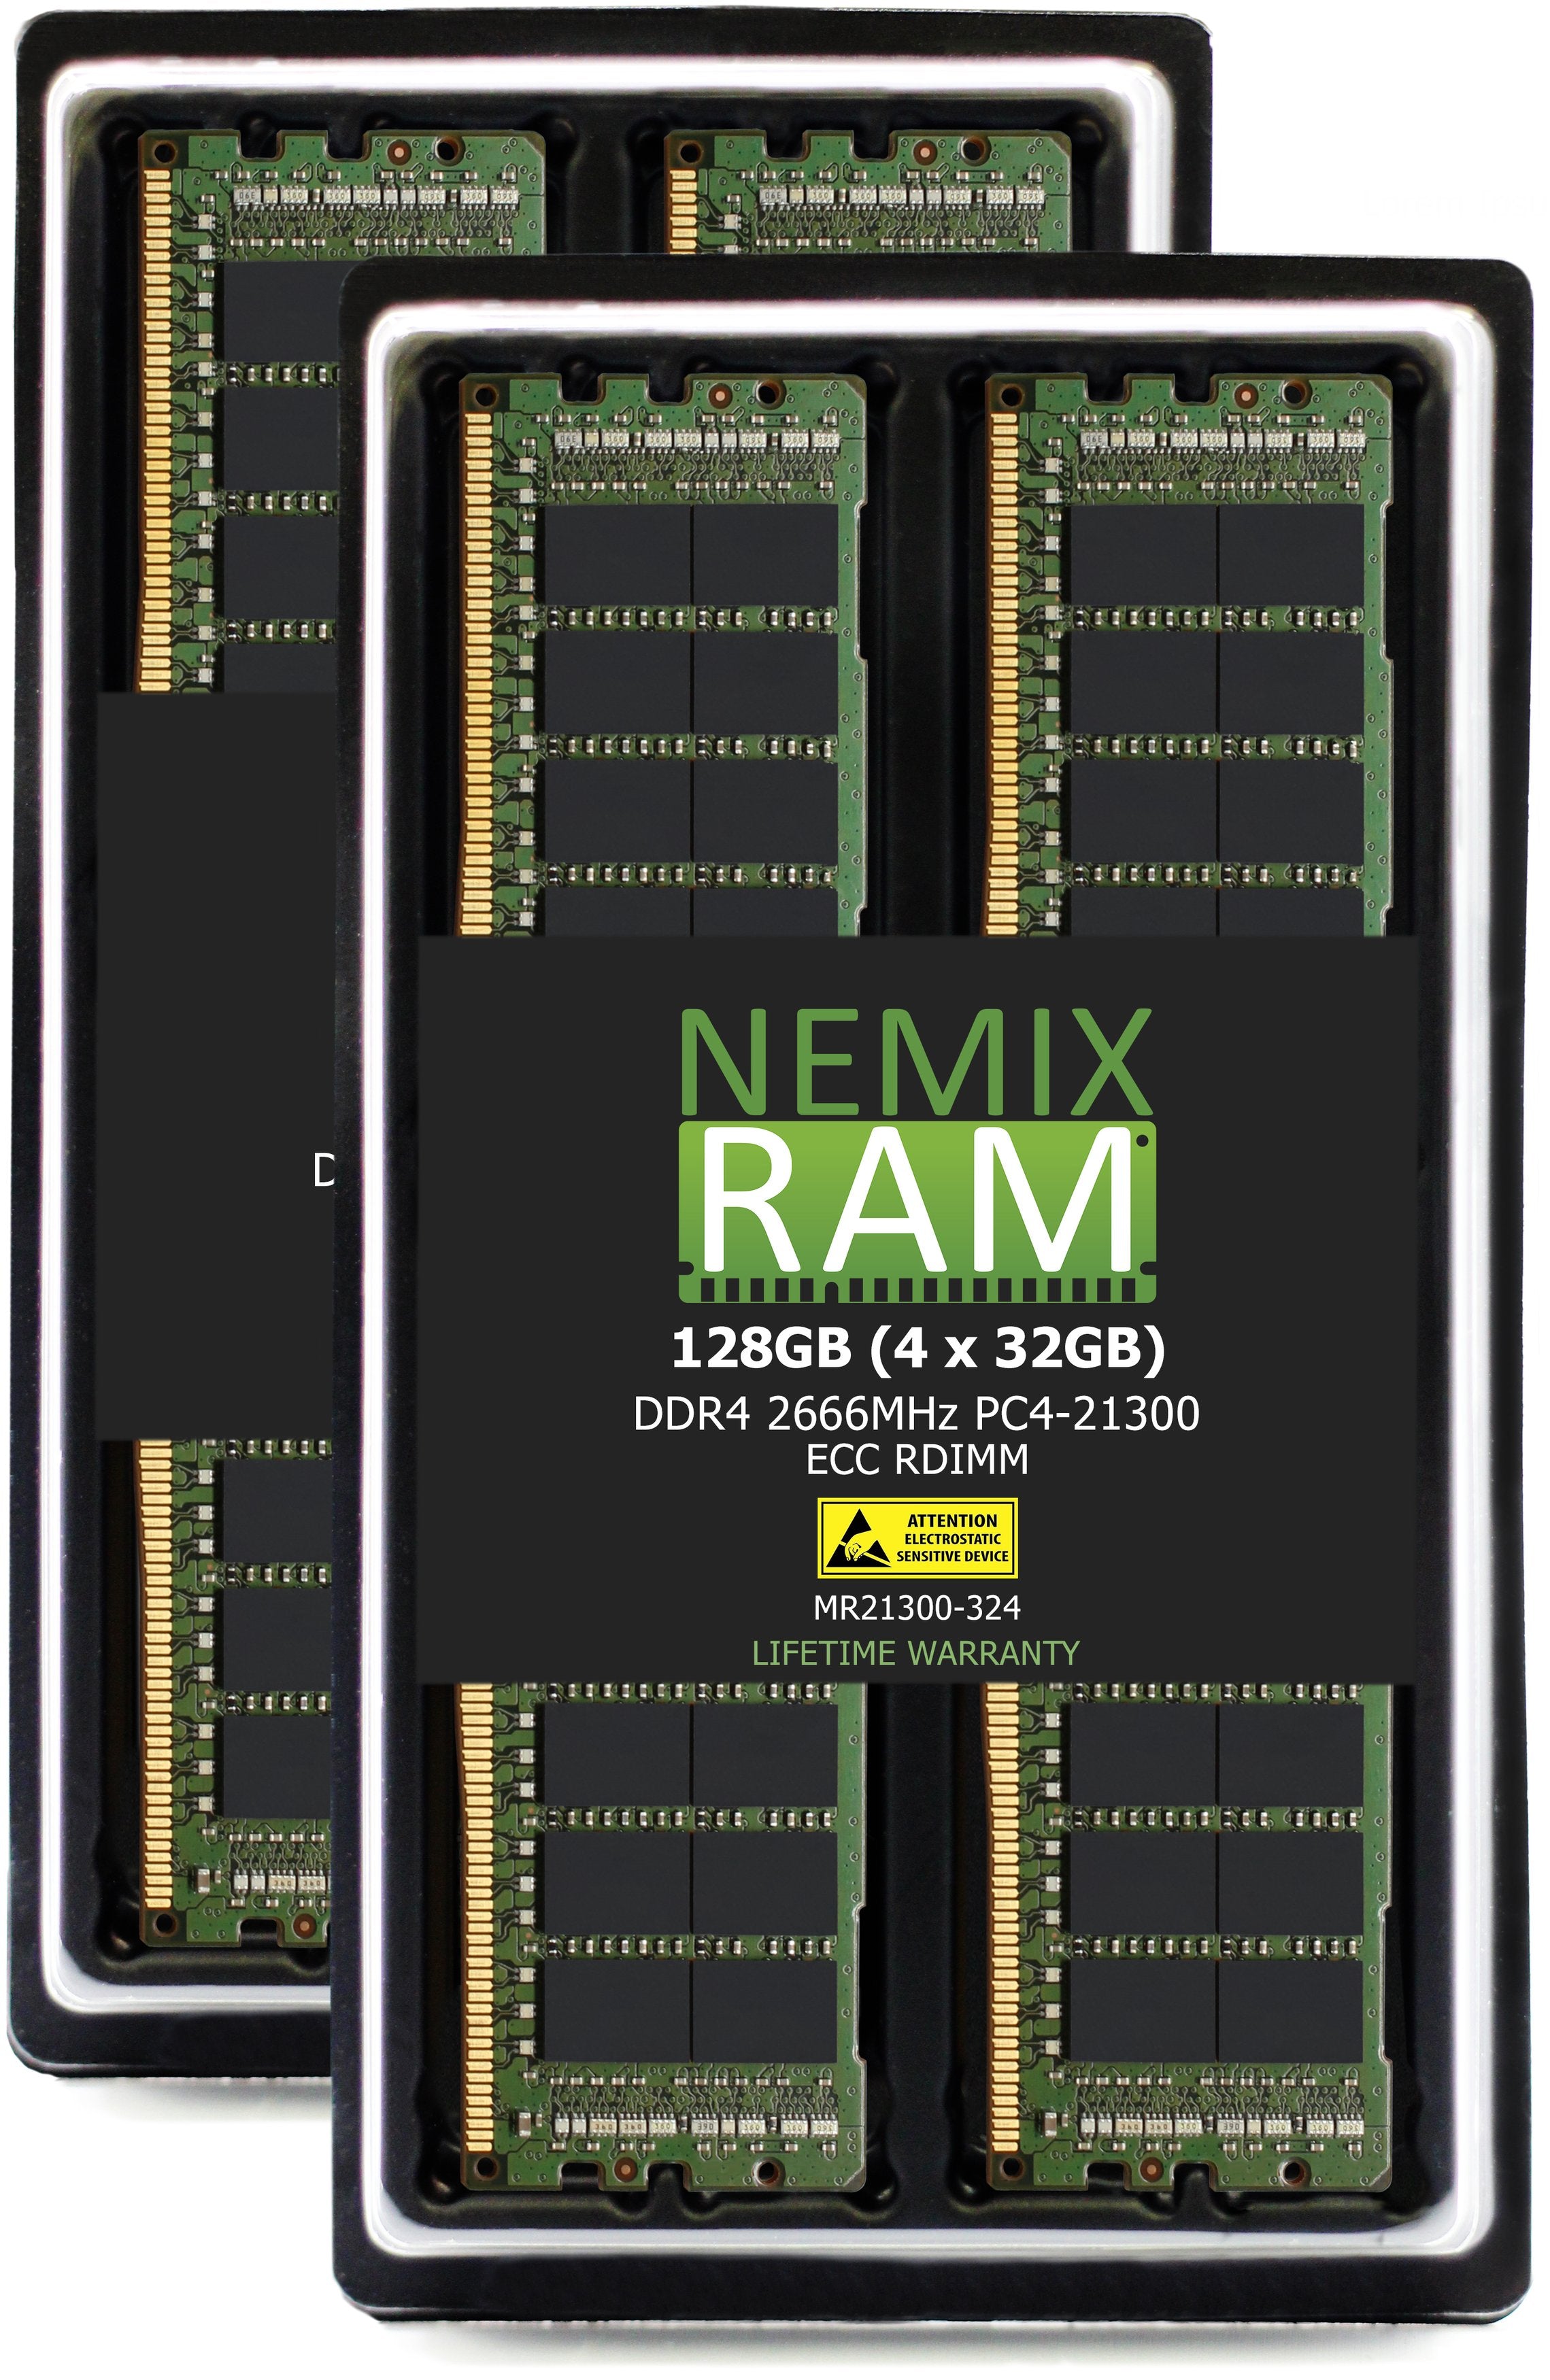 DDR4 2666MHZ PC4-21300 RDIMM Compatible with Synology SA3600